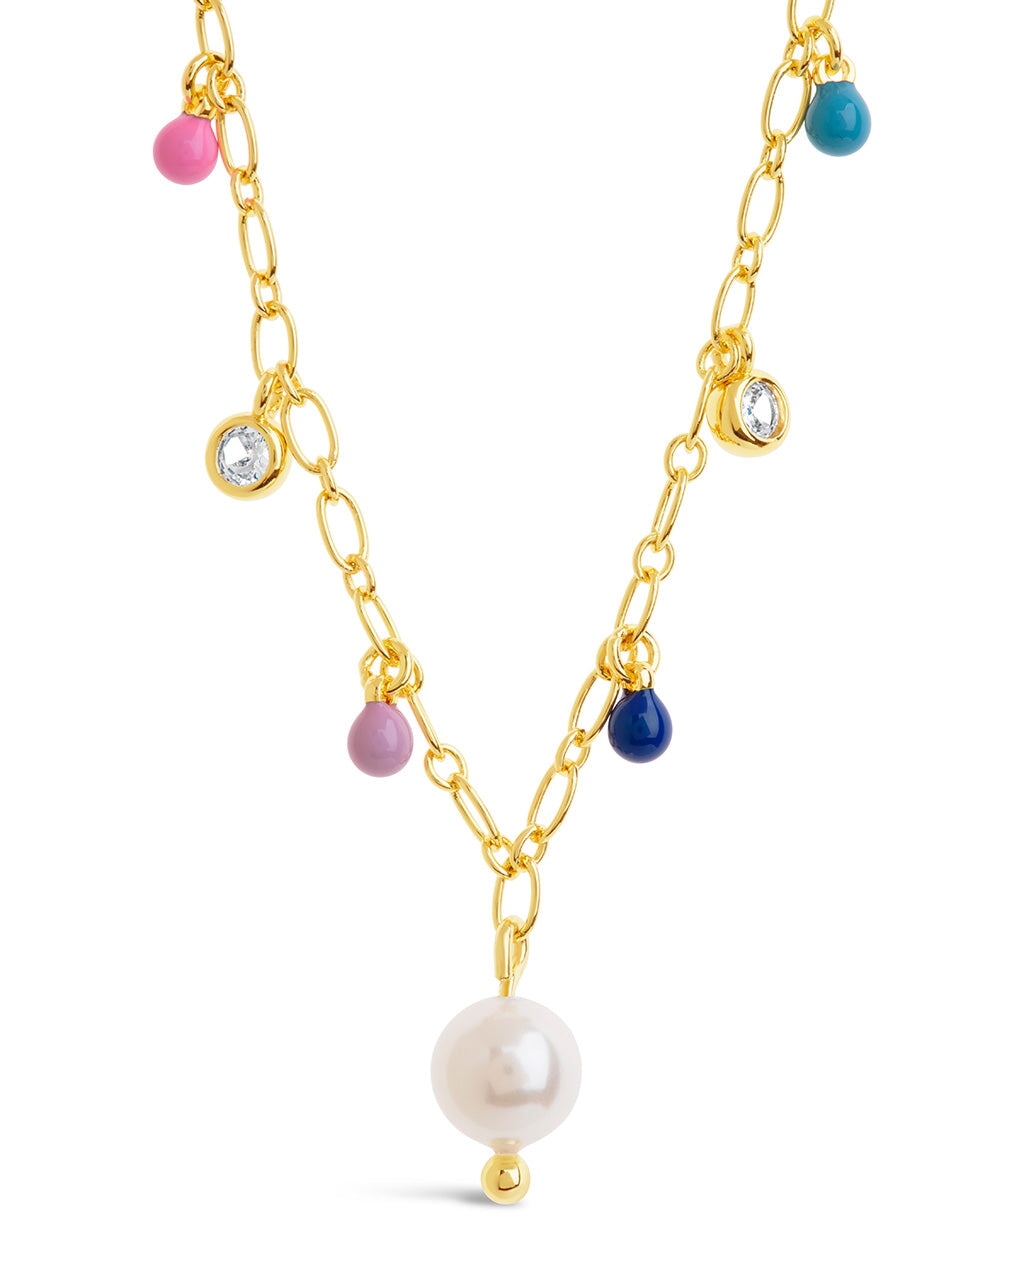 Enamel, Pearl, & CZ Charm Necklace Necklace Sterling Forever Gold 